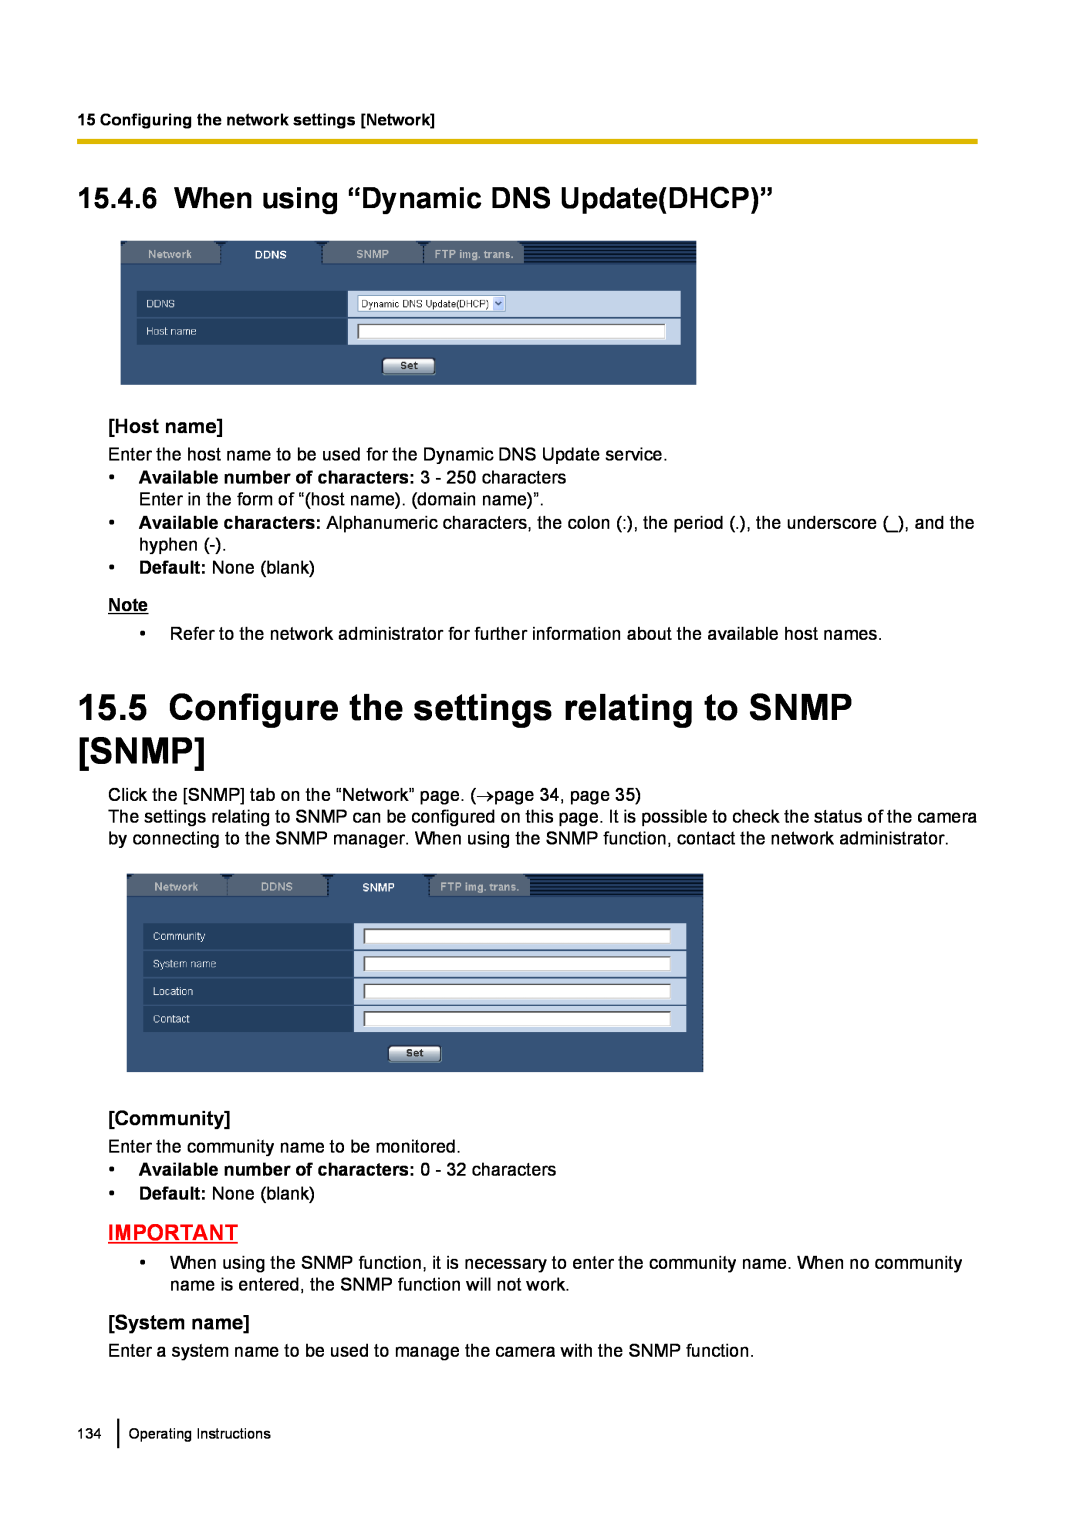 Panasonic BL-VP104W manual 15.5Configure the settings relating to SNMP SNMP, When using “Dynamic DNS UpdateDHCP”, Community 